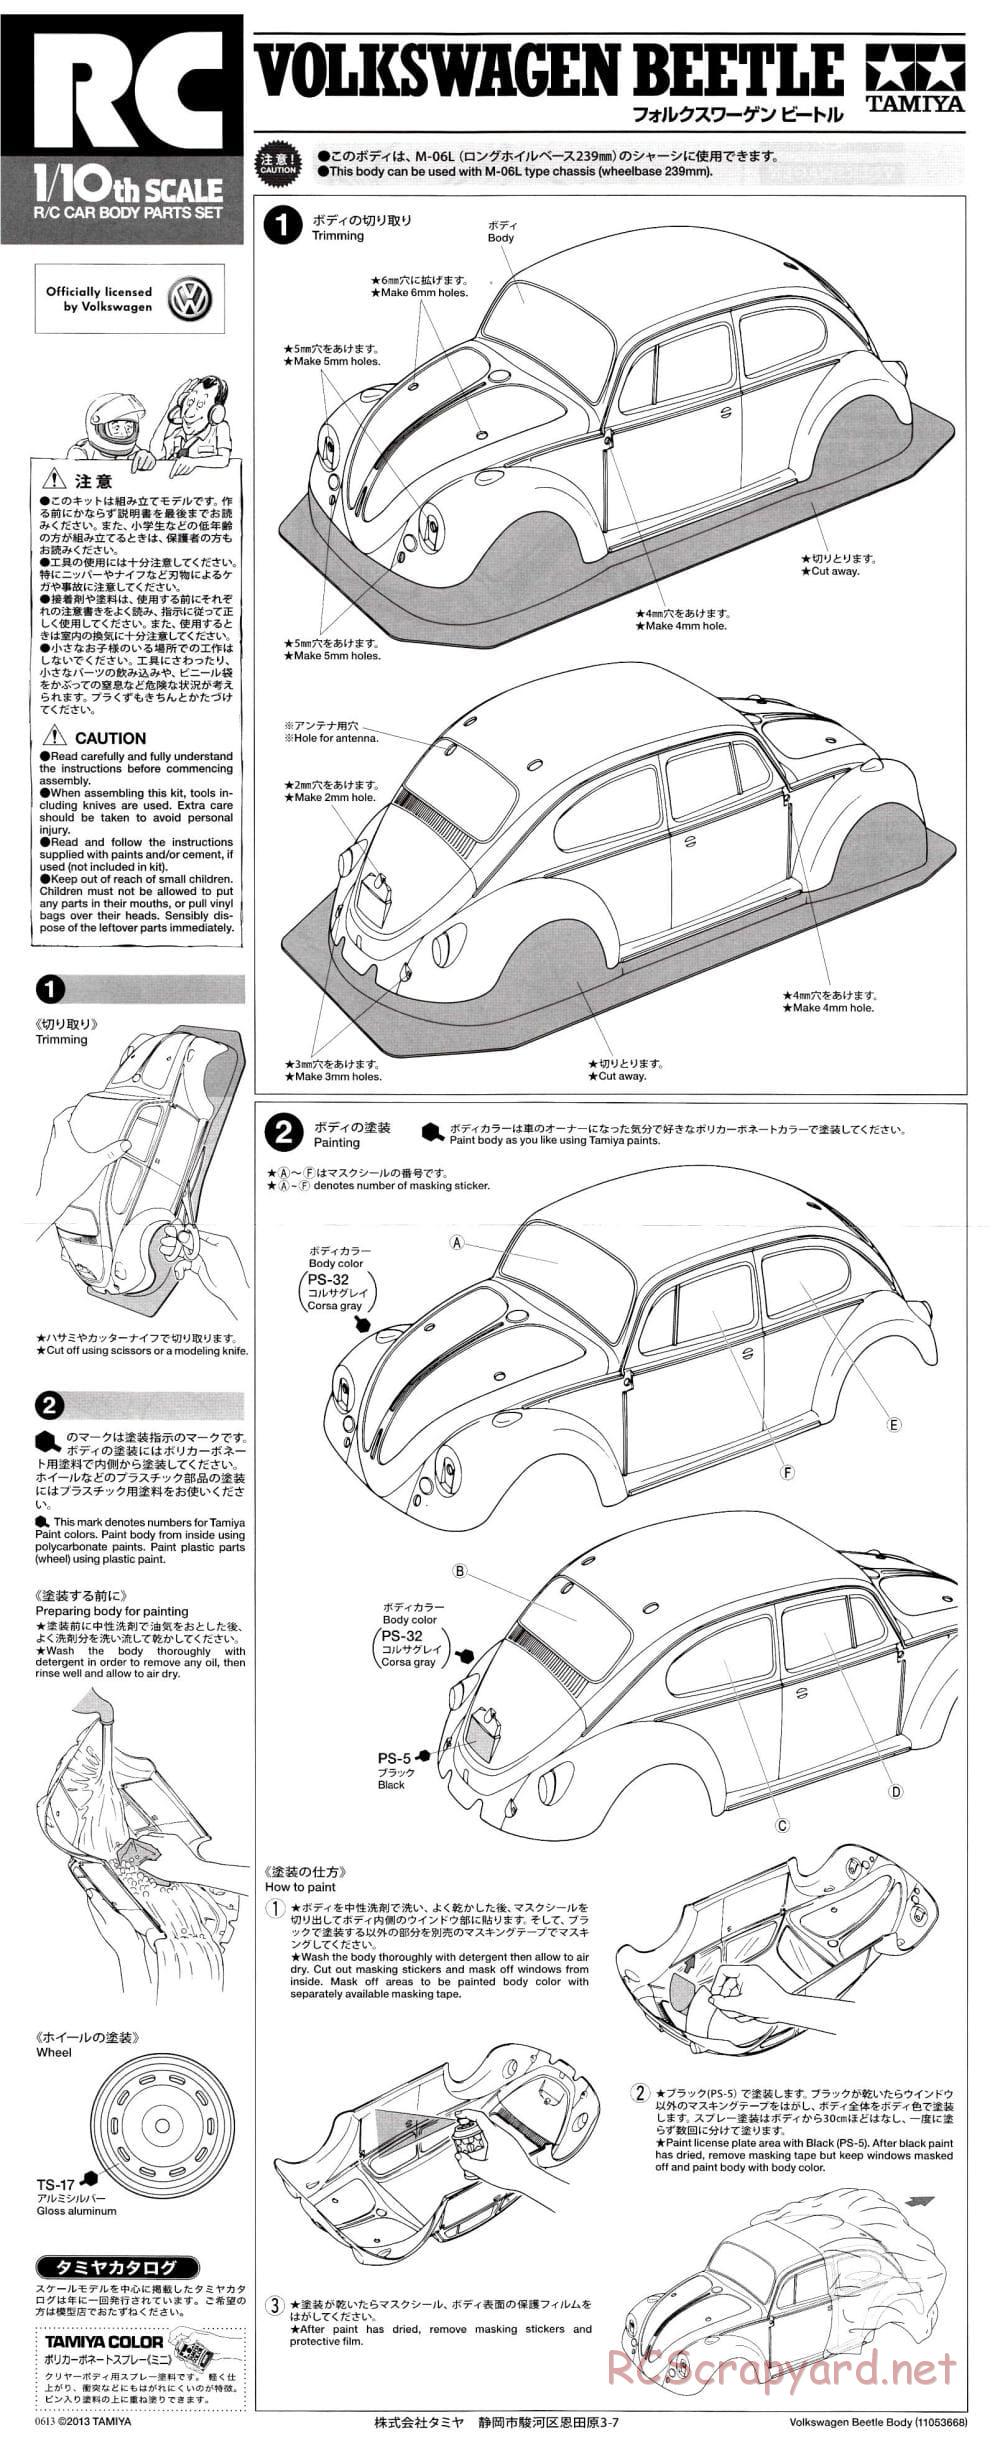 Tamiya - Volkswagen Beetle - M-06 Chassis - Body Manual - Page 1